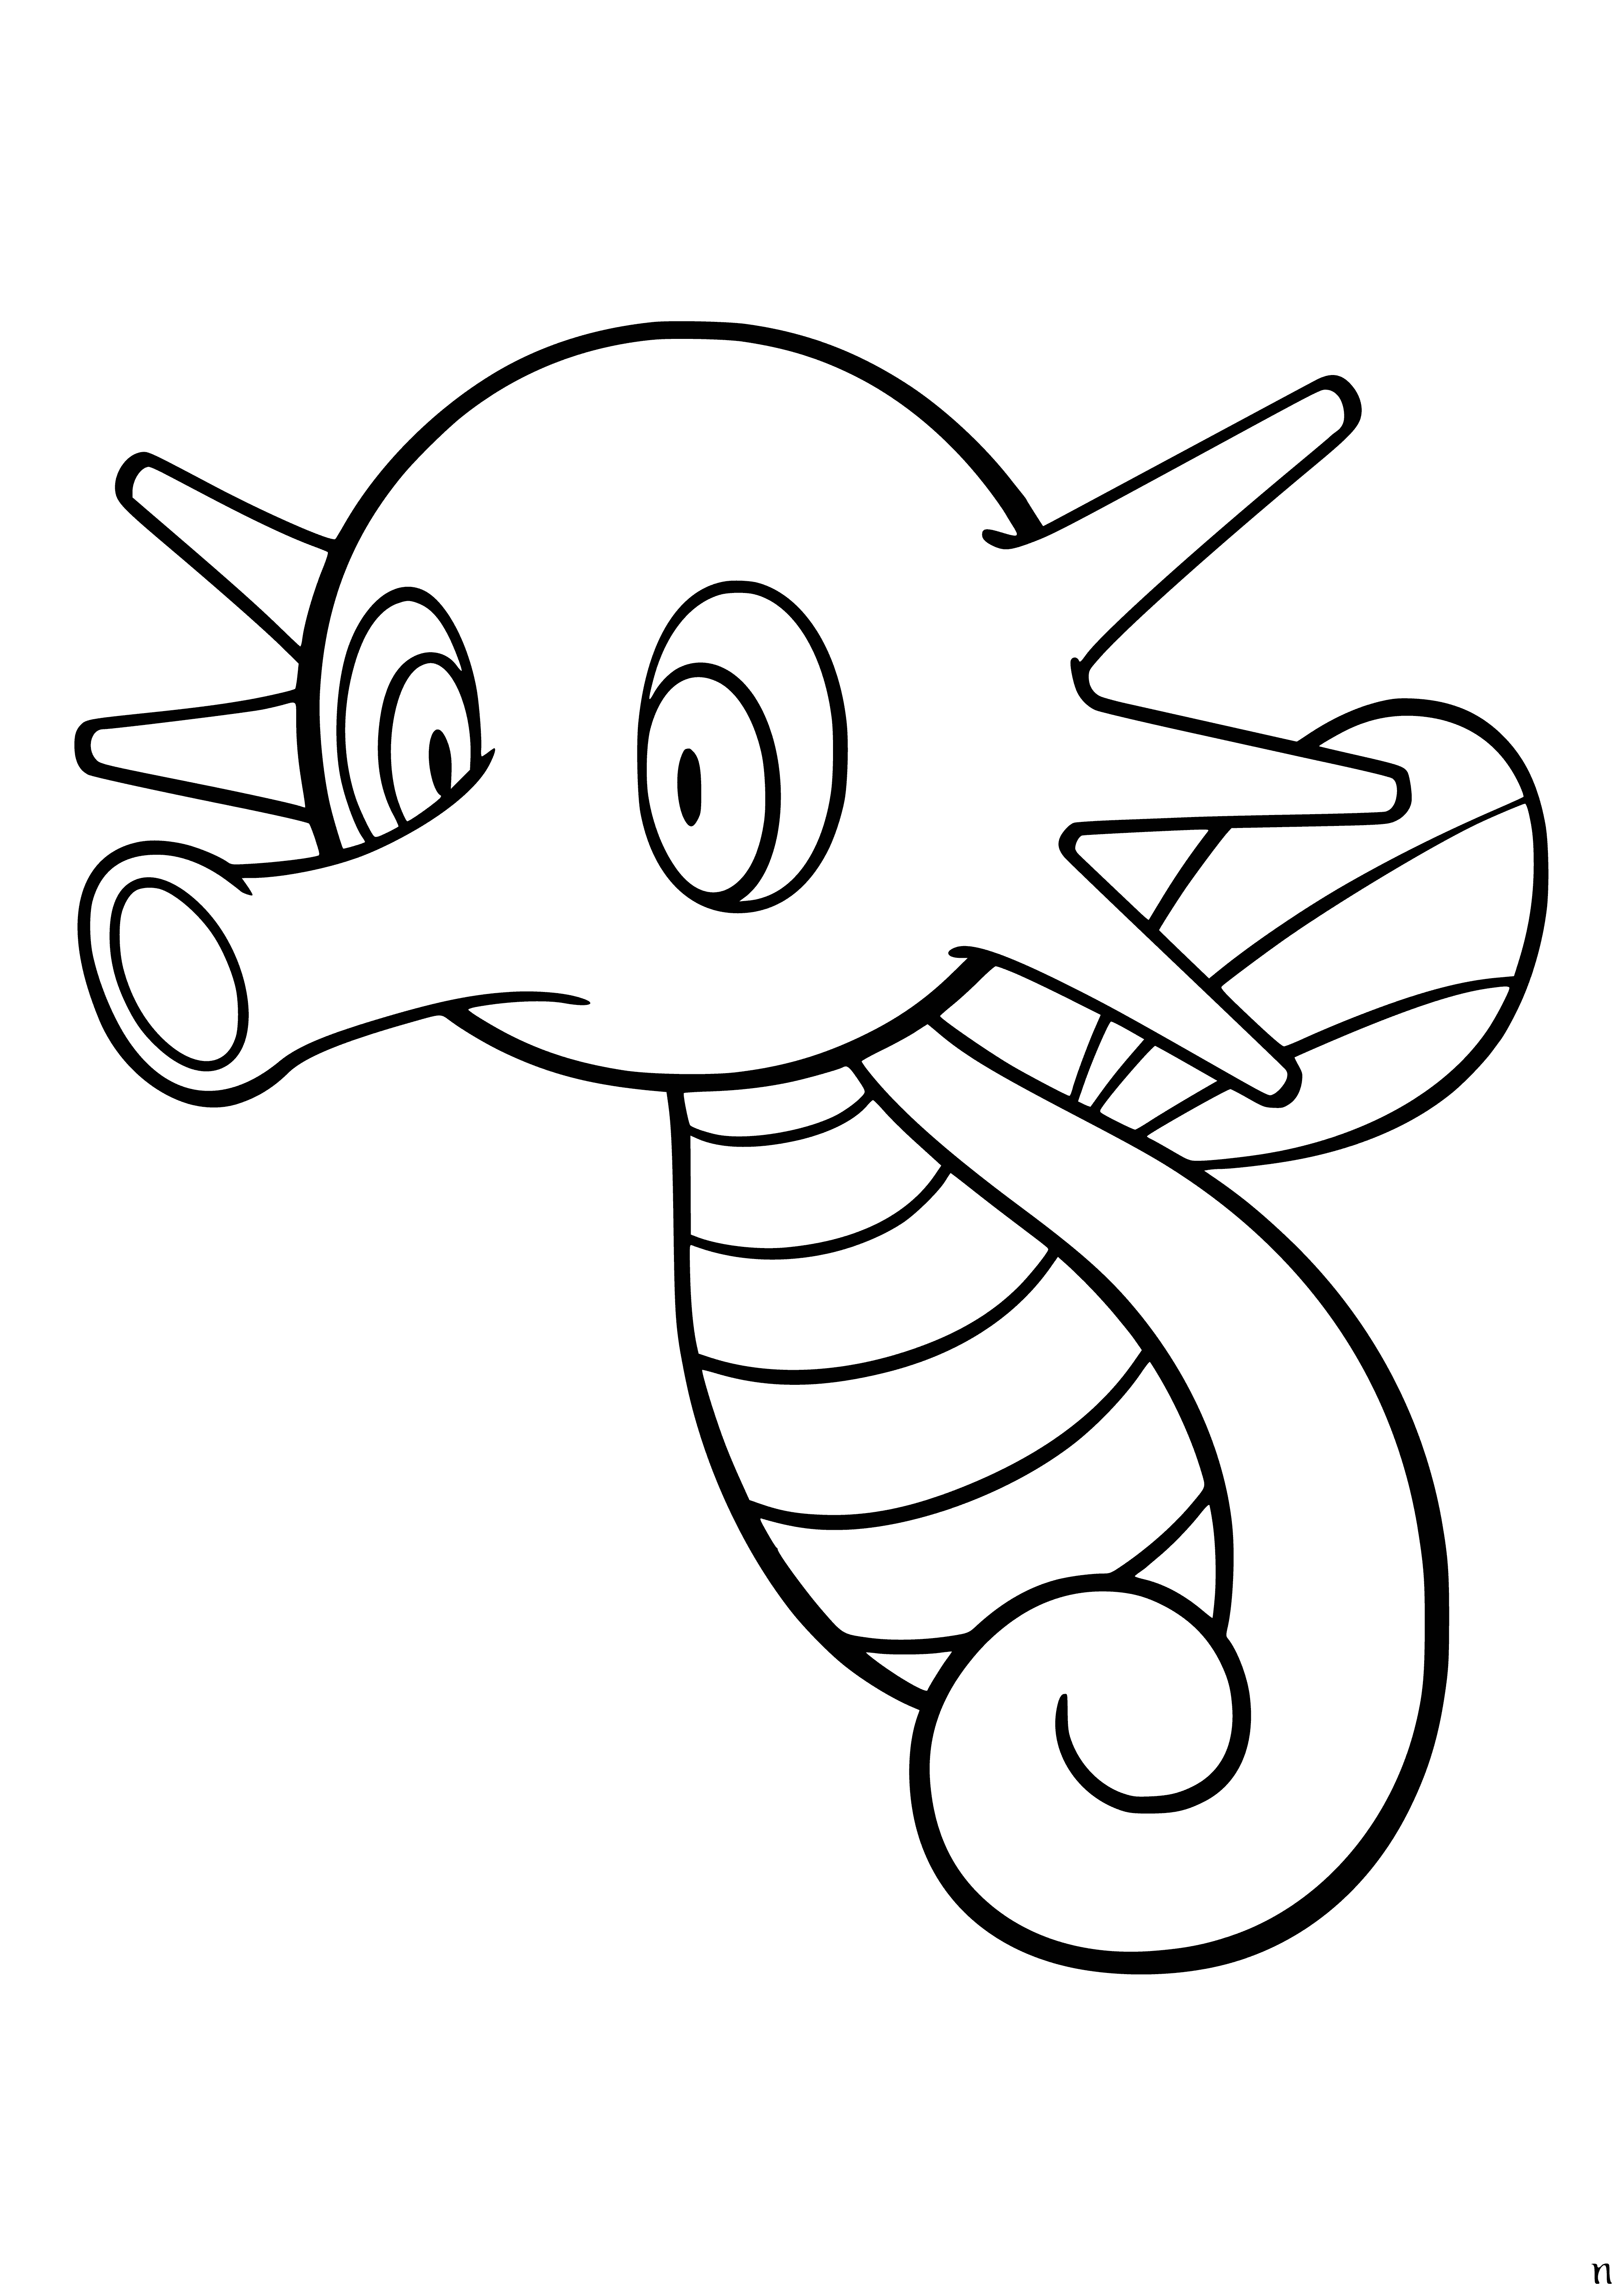 coloring page: Small blue Pokémon w/long snout & large eyes. Has white barbels & fin-like growth. Brown growth on back & long, thin webbed tail.